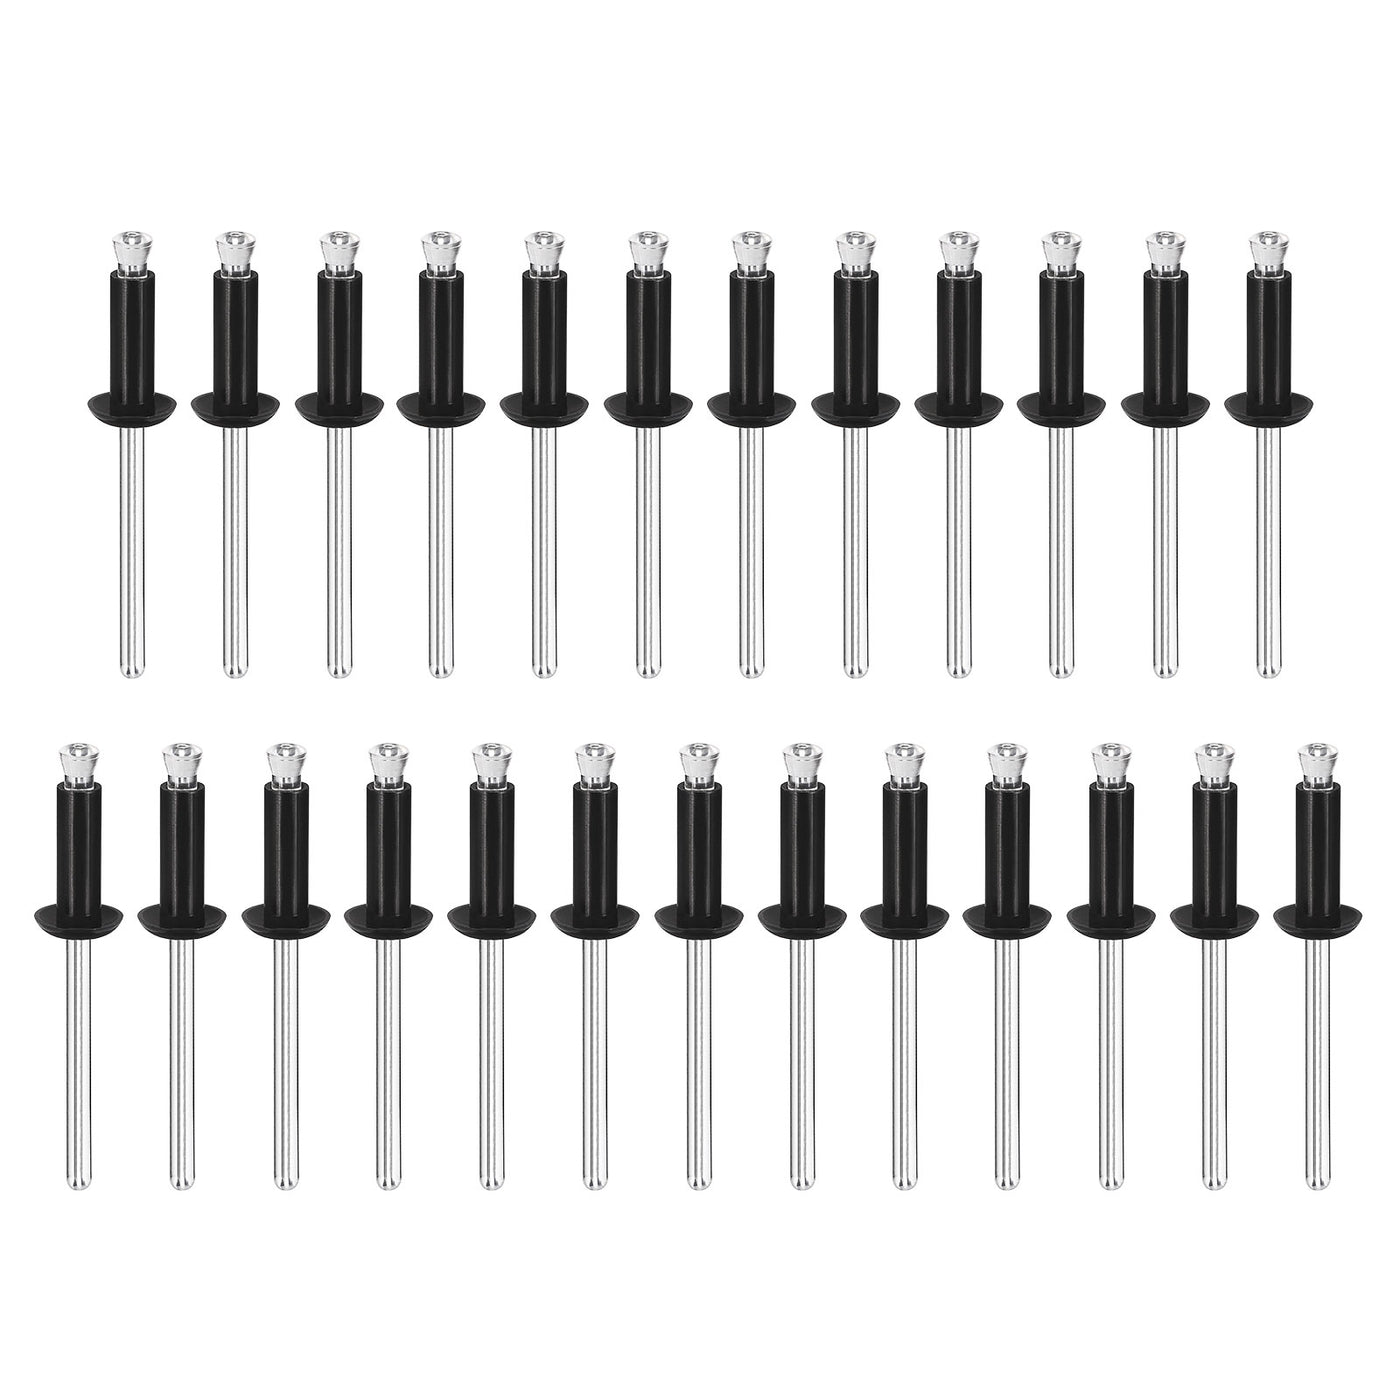 uxcell Uxcell 4.8mm x 14.4mm Nylon Blind Rivets for PC Board Bumper Trim Retainer, Black 25Pcs